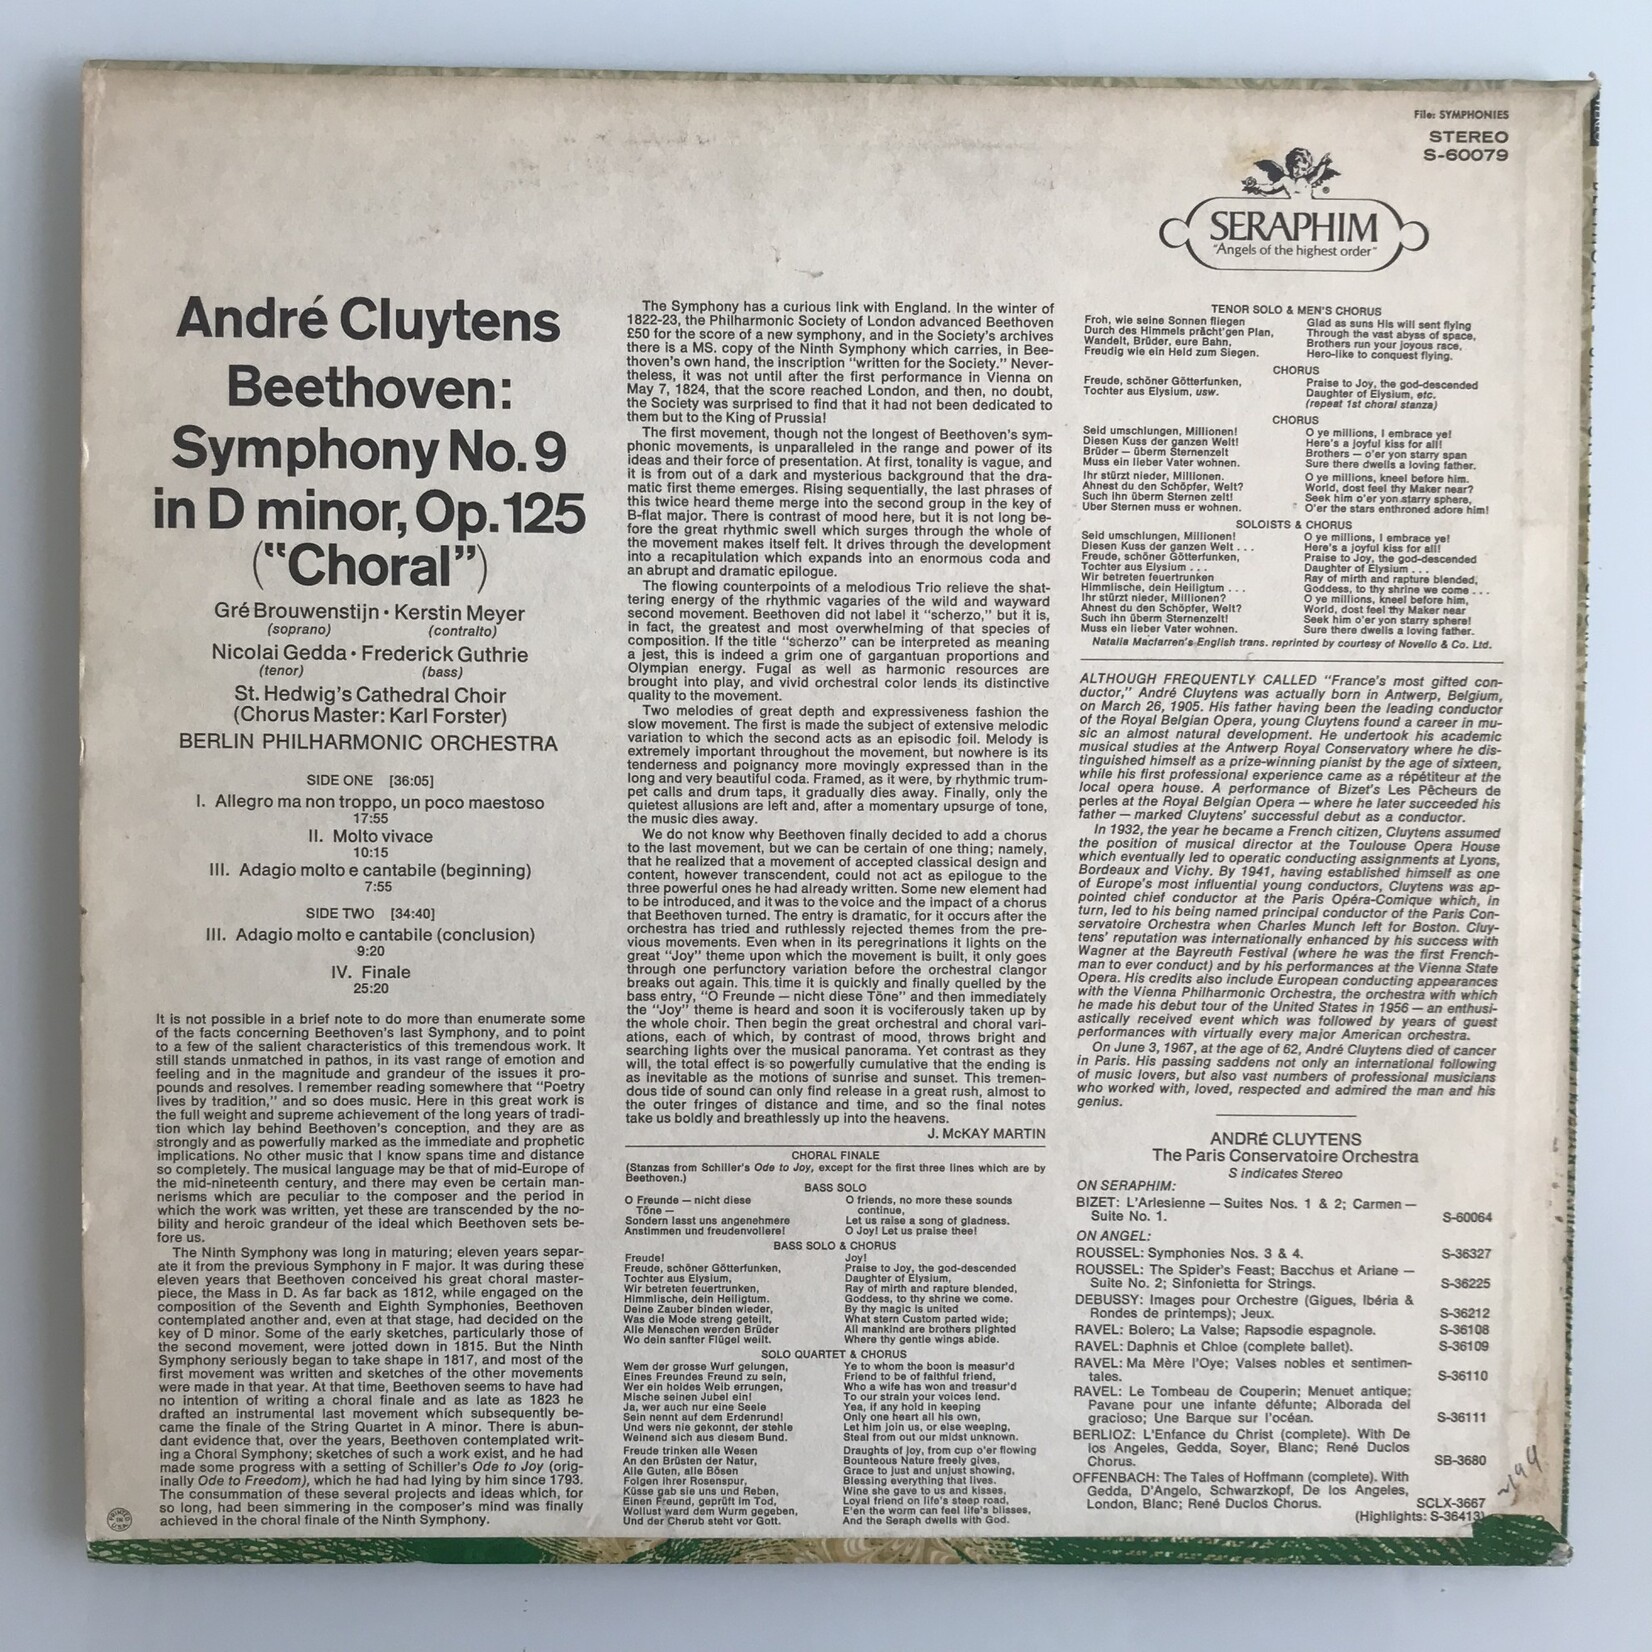 Andre Cluytens - Beethoven: Symphony No. 9 ("Choral") - Vinyl LP (USED)